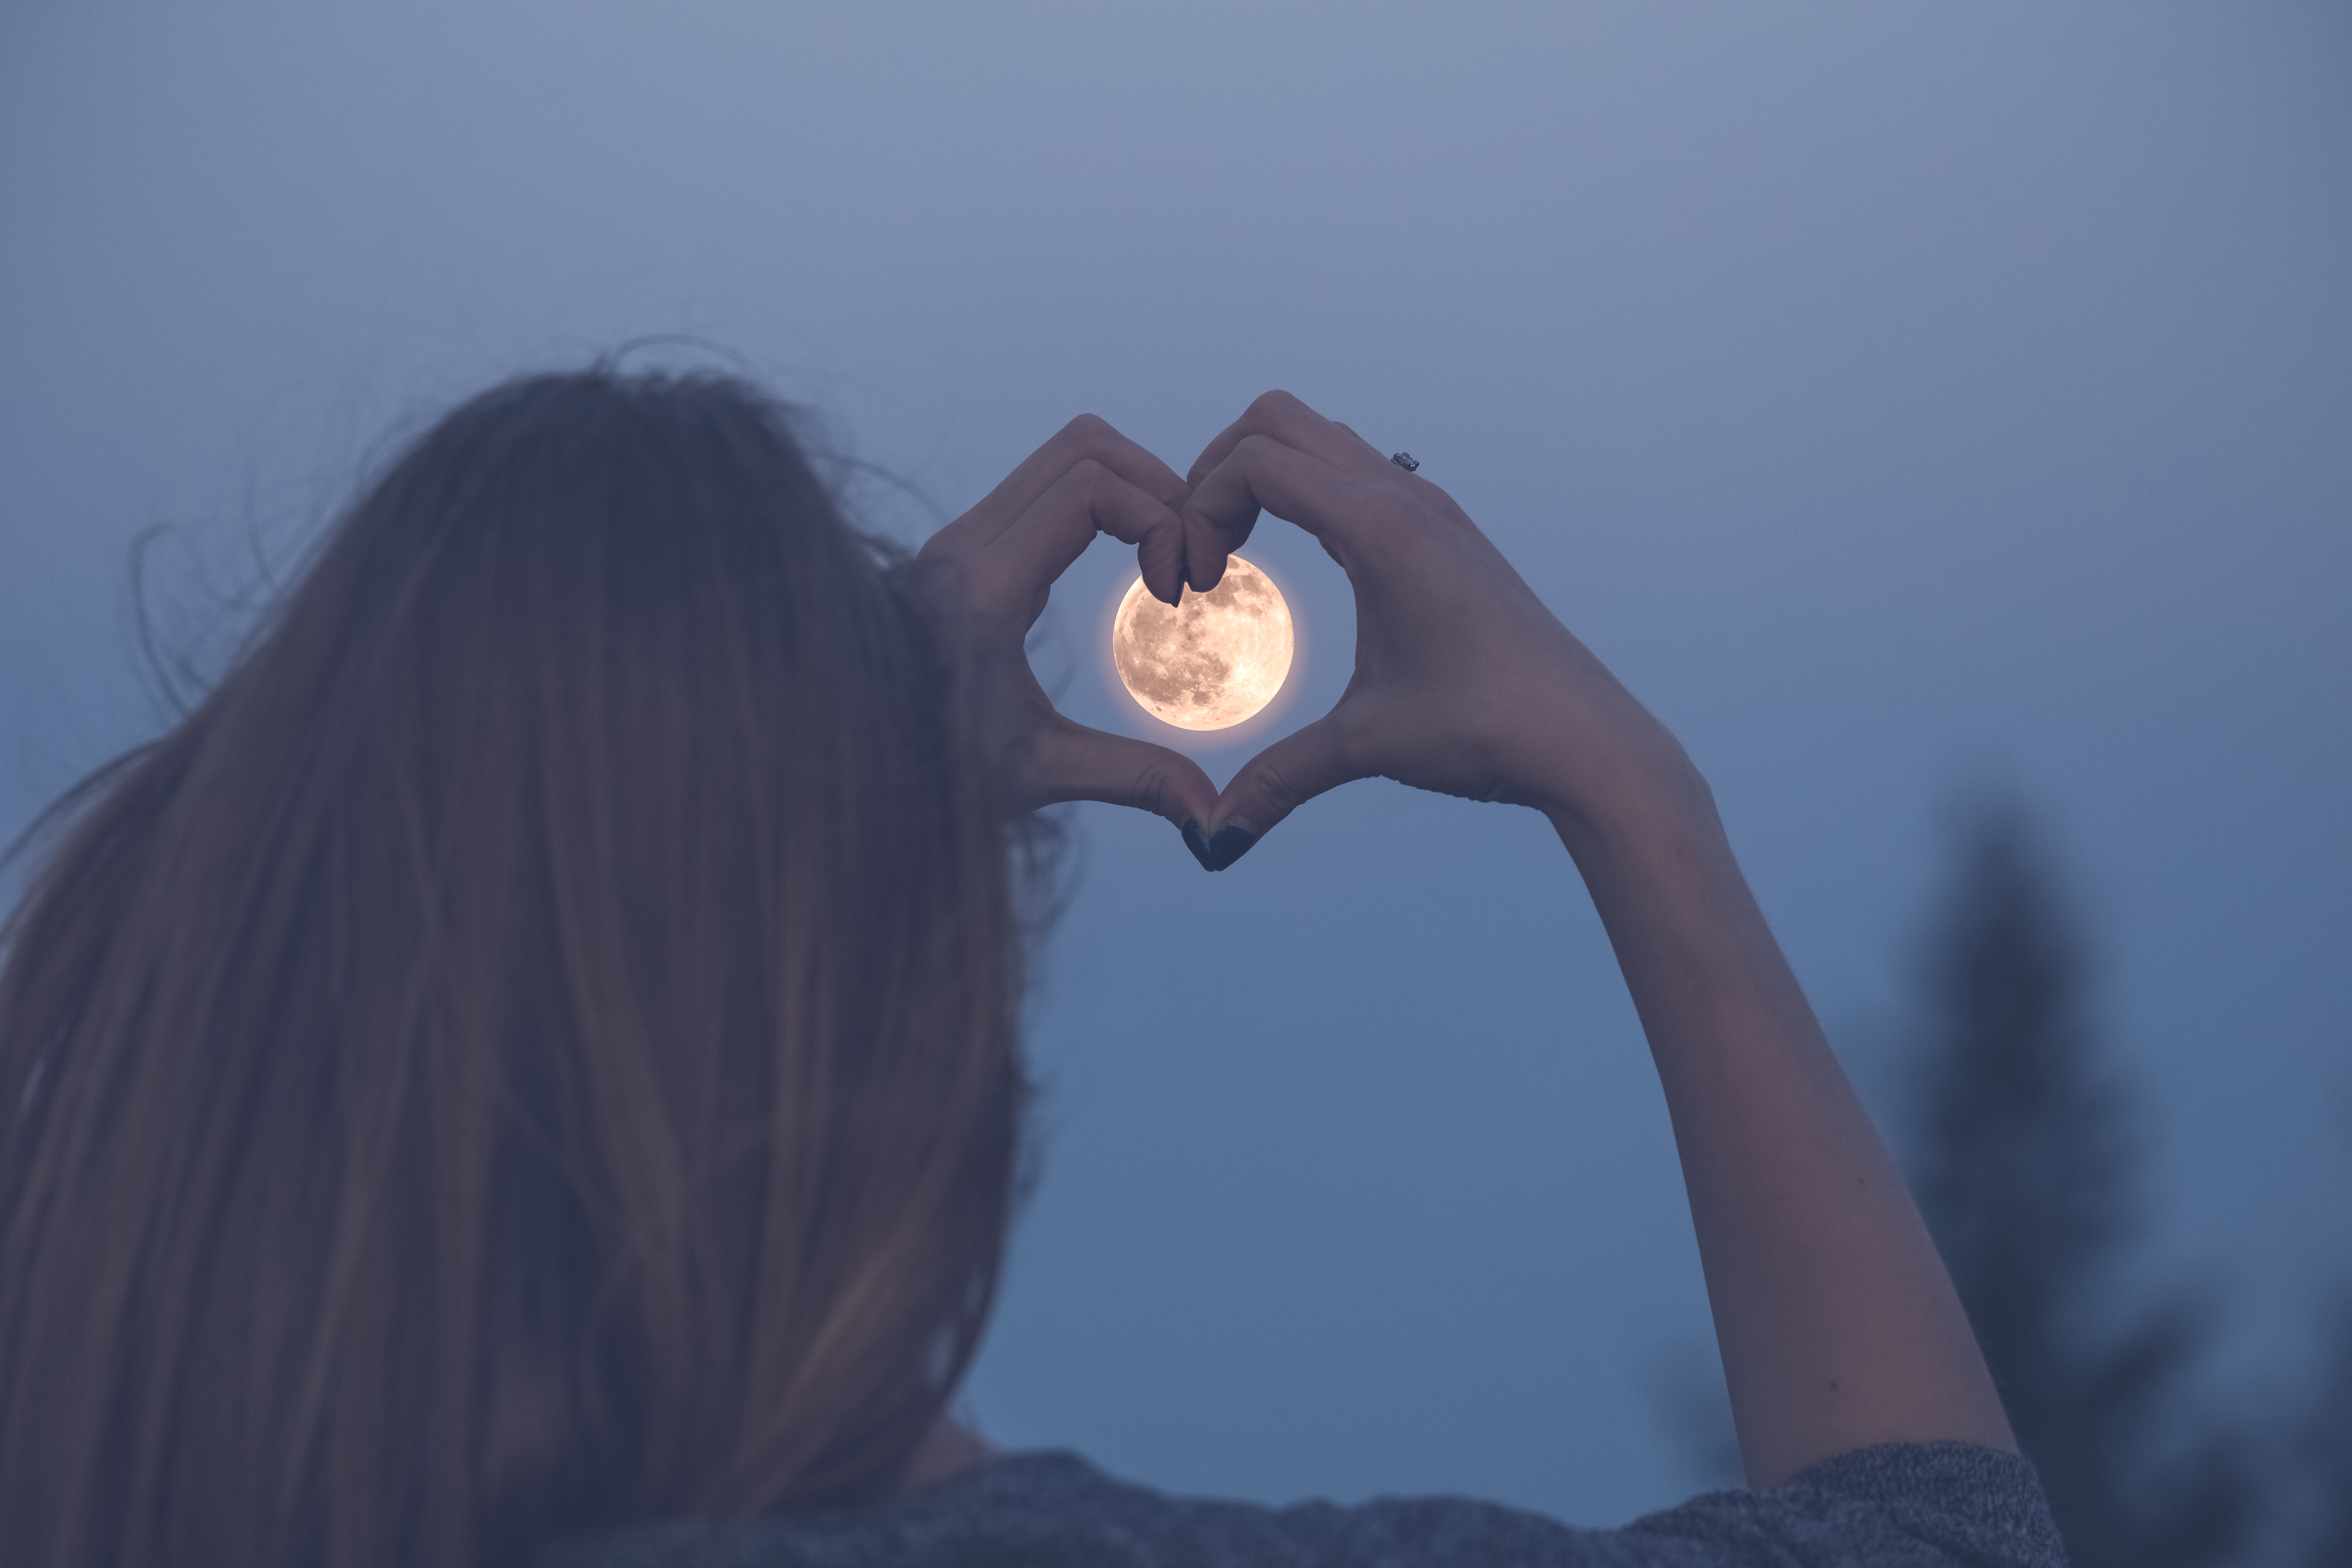 A woman making a heart shape with her hands over a full moon